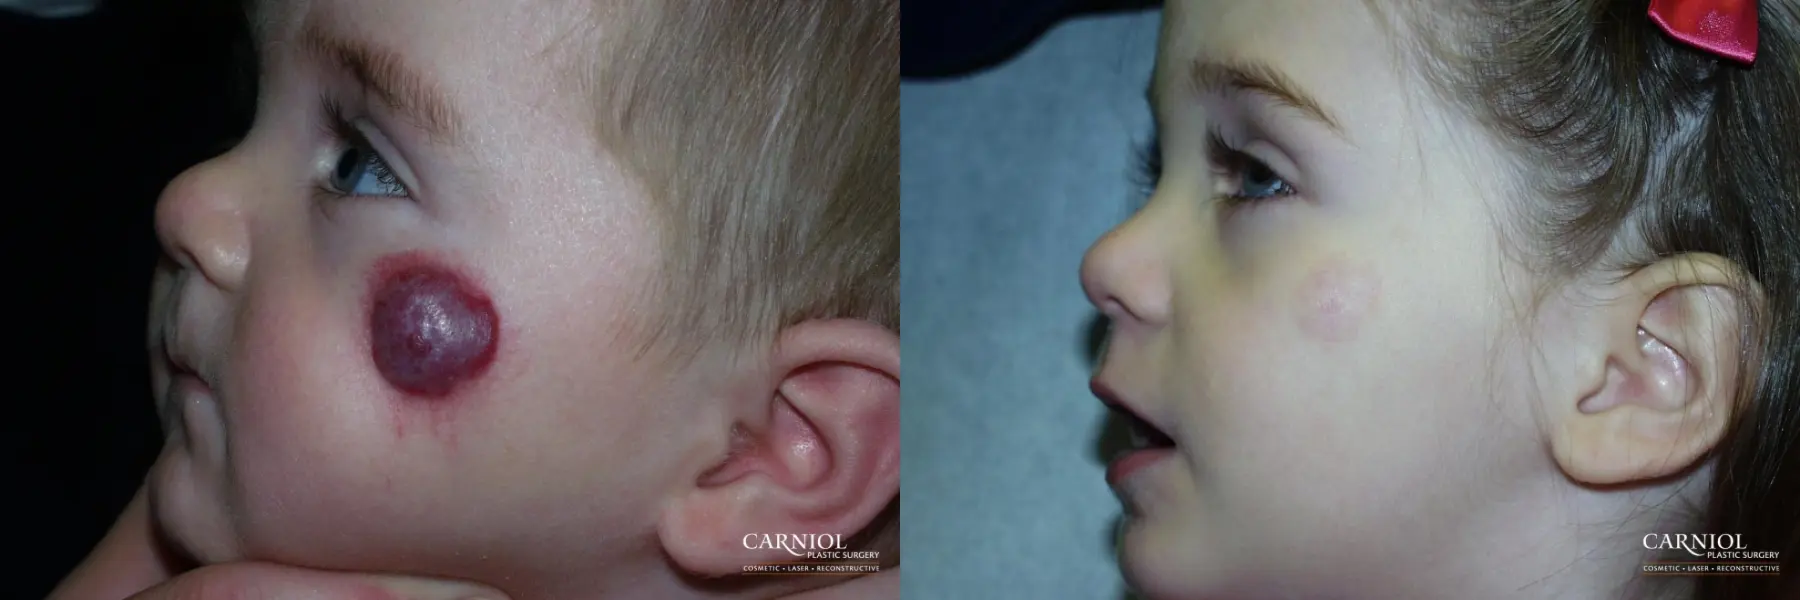 Hemangioma: Patient 1 - Before and After  